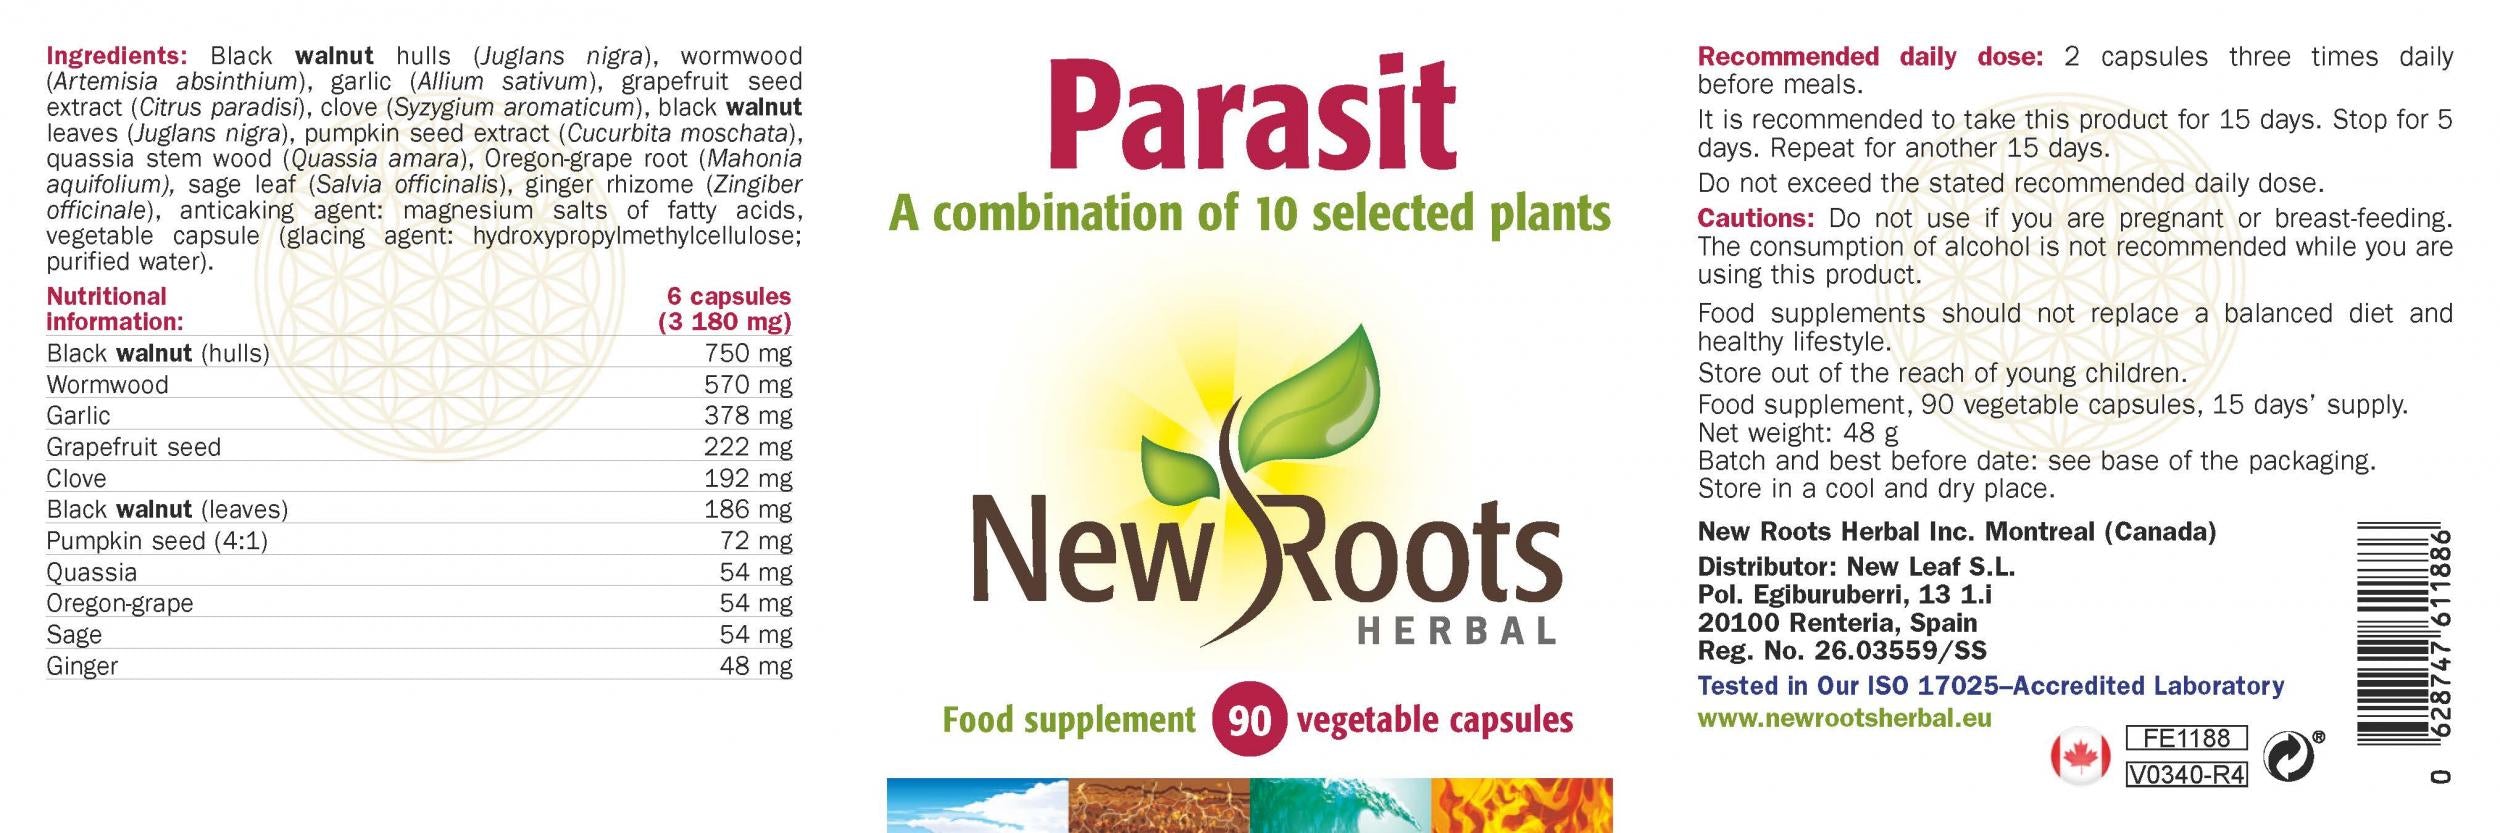 New Roots Herbal Parasit (formerly known as PurgeParasitis) 90's